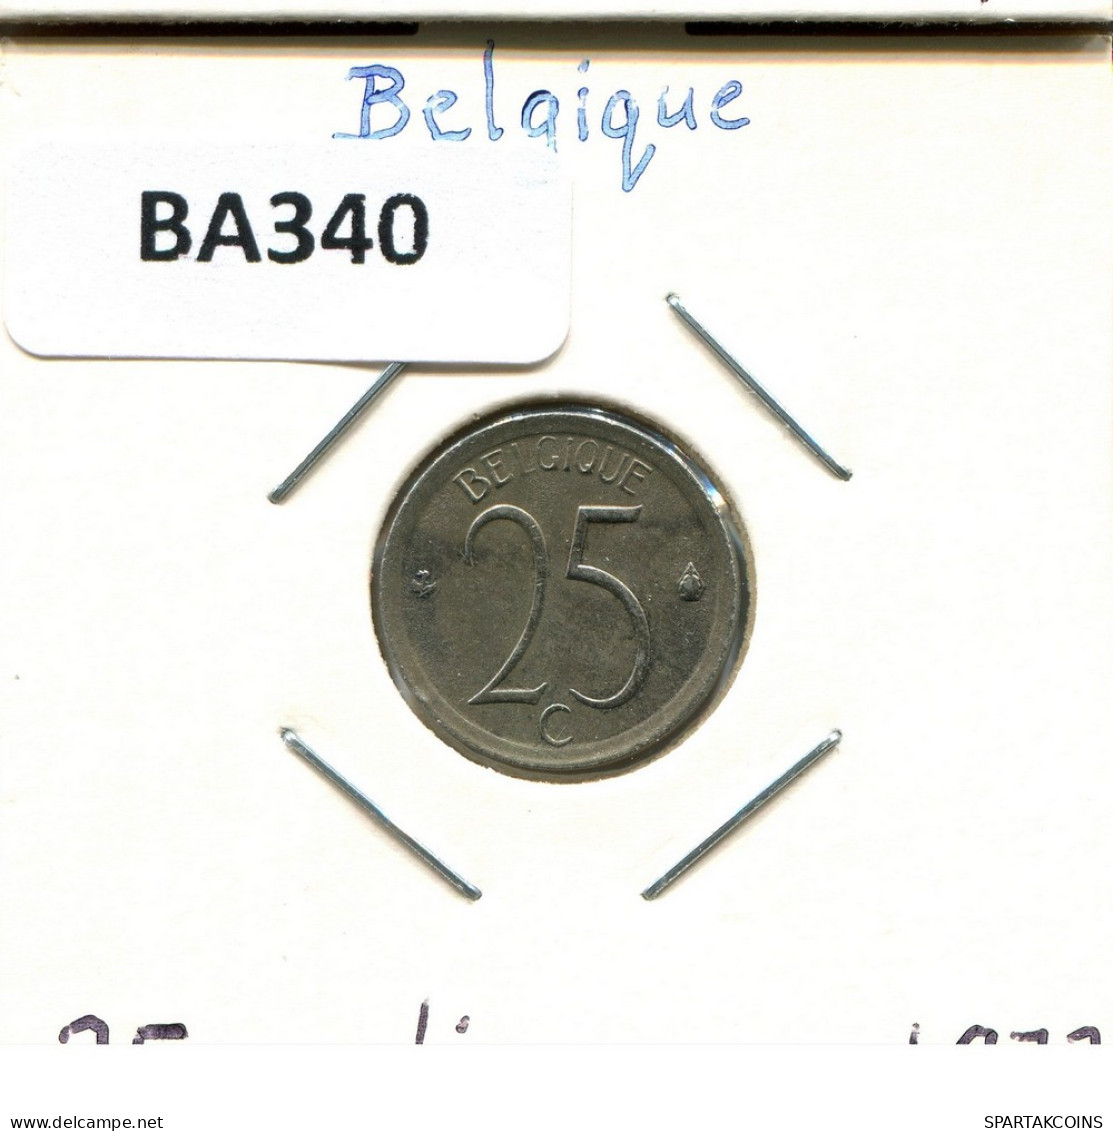 25 CENTIMES 1973 FRENCH Text BELGIUM Coin #BA340.U - 25 Cents